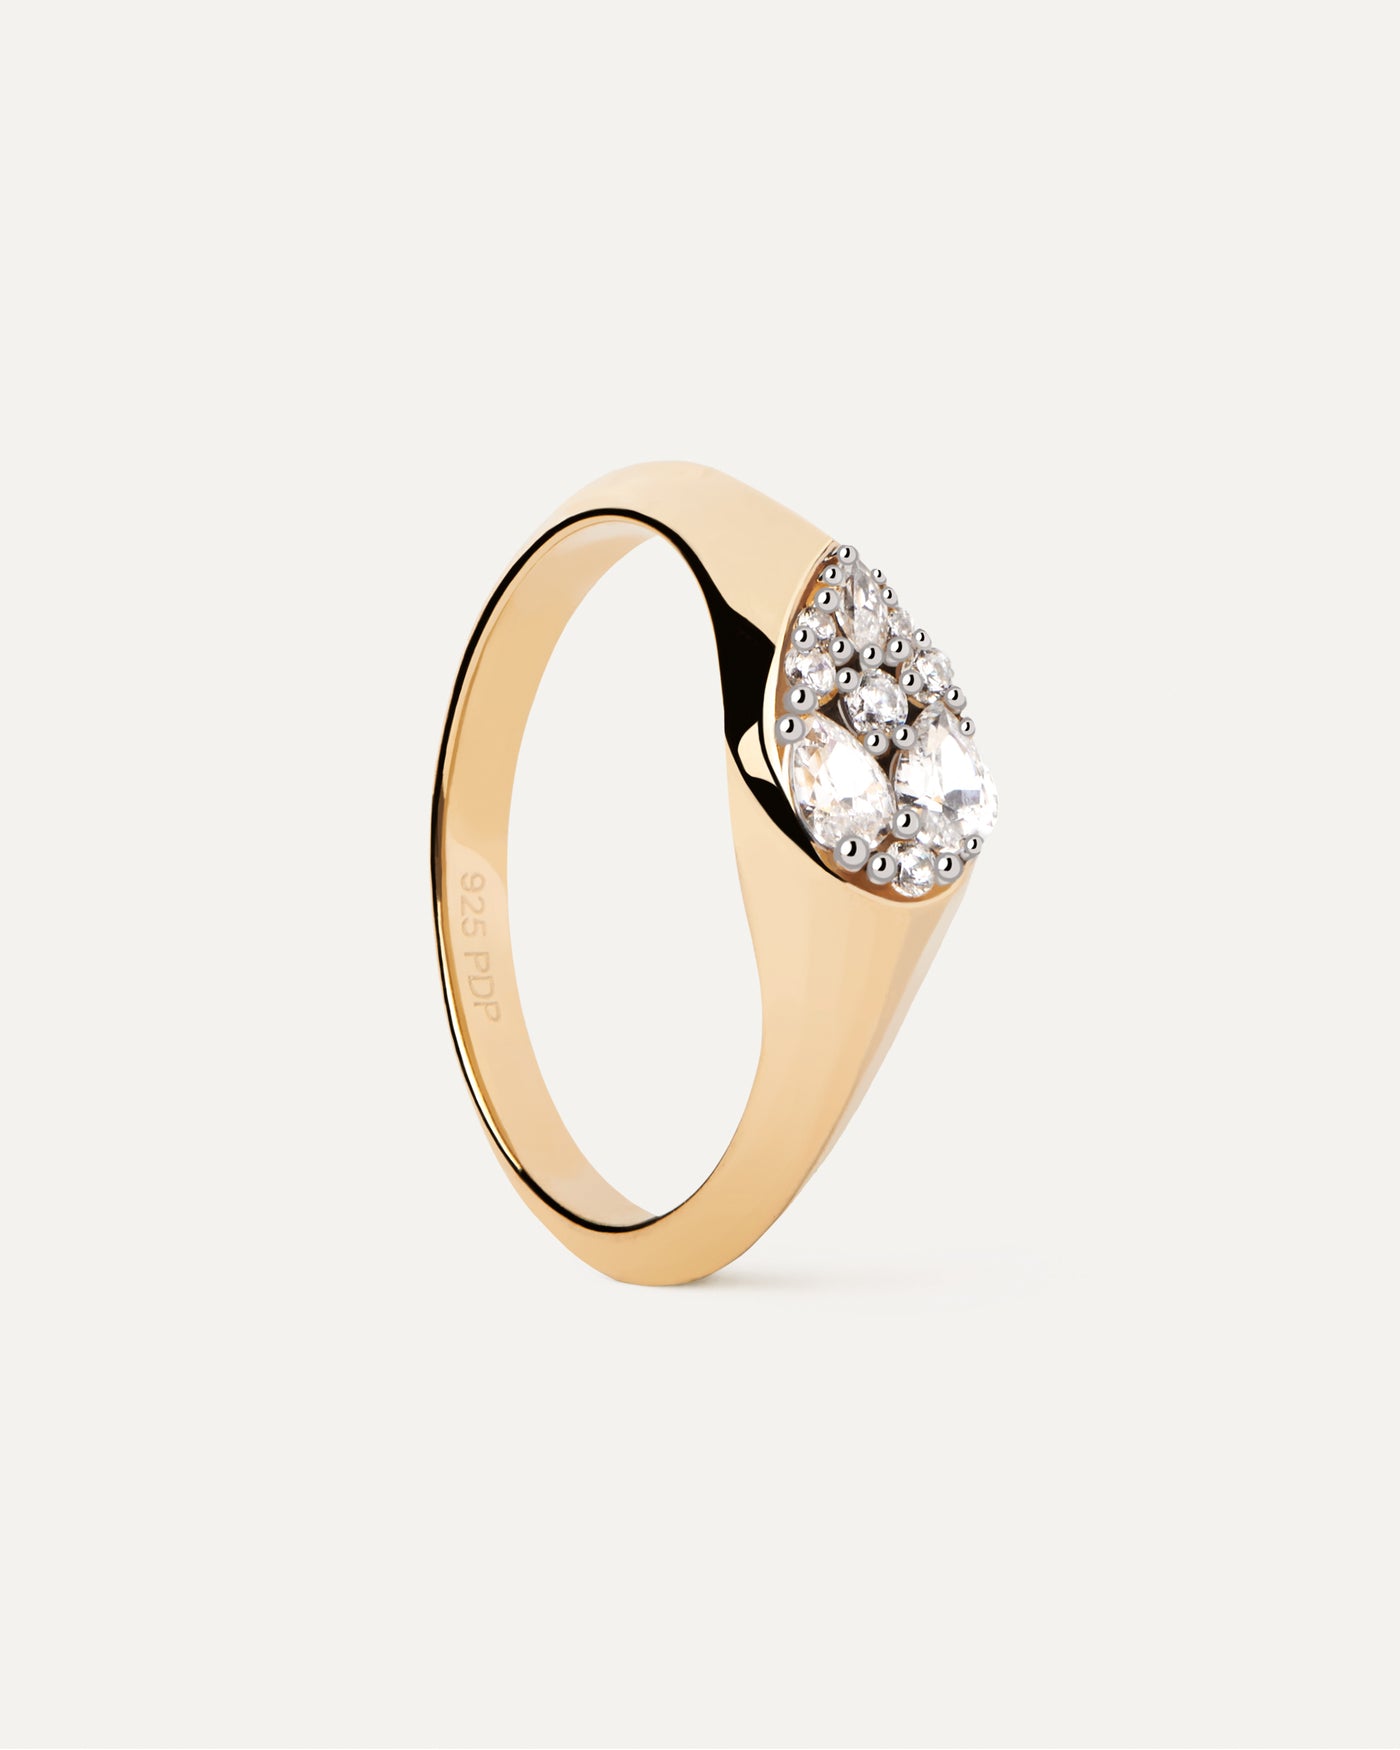 2023 Selection | Vanilla Stamp Ring. Gold-plated signet ring set with pear shape white zirconia multi-stone cluster. Get the latest arrival from PDPAOLA. Place your order safely and get this Best Seller. Free Shipping.